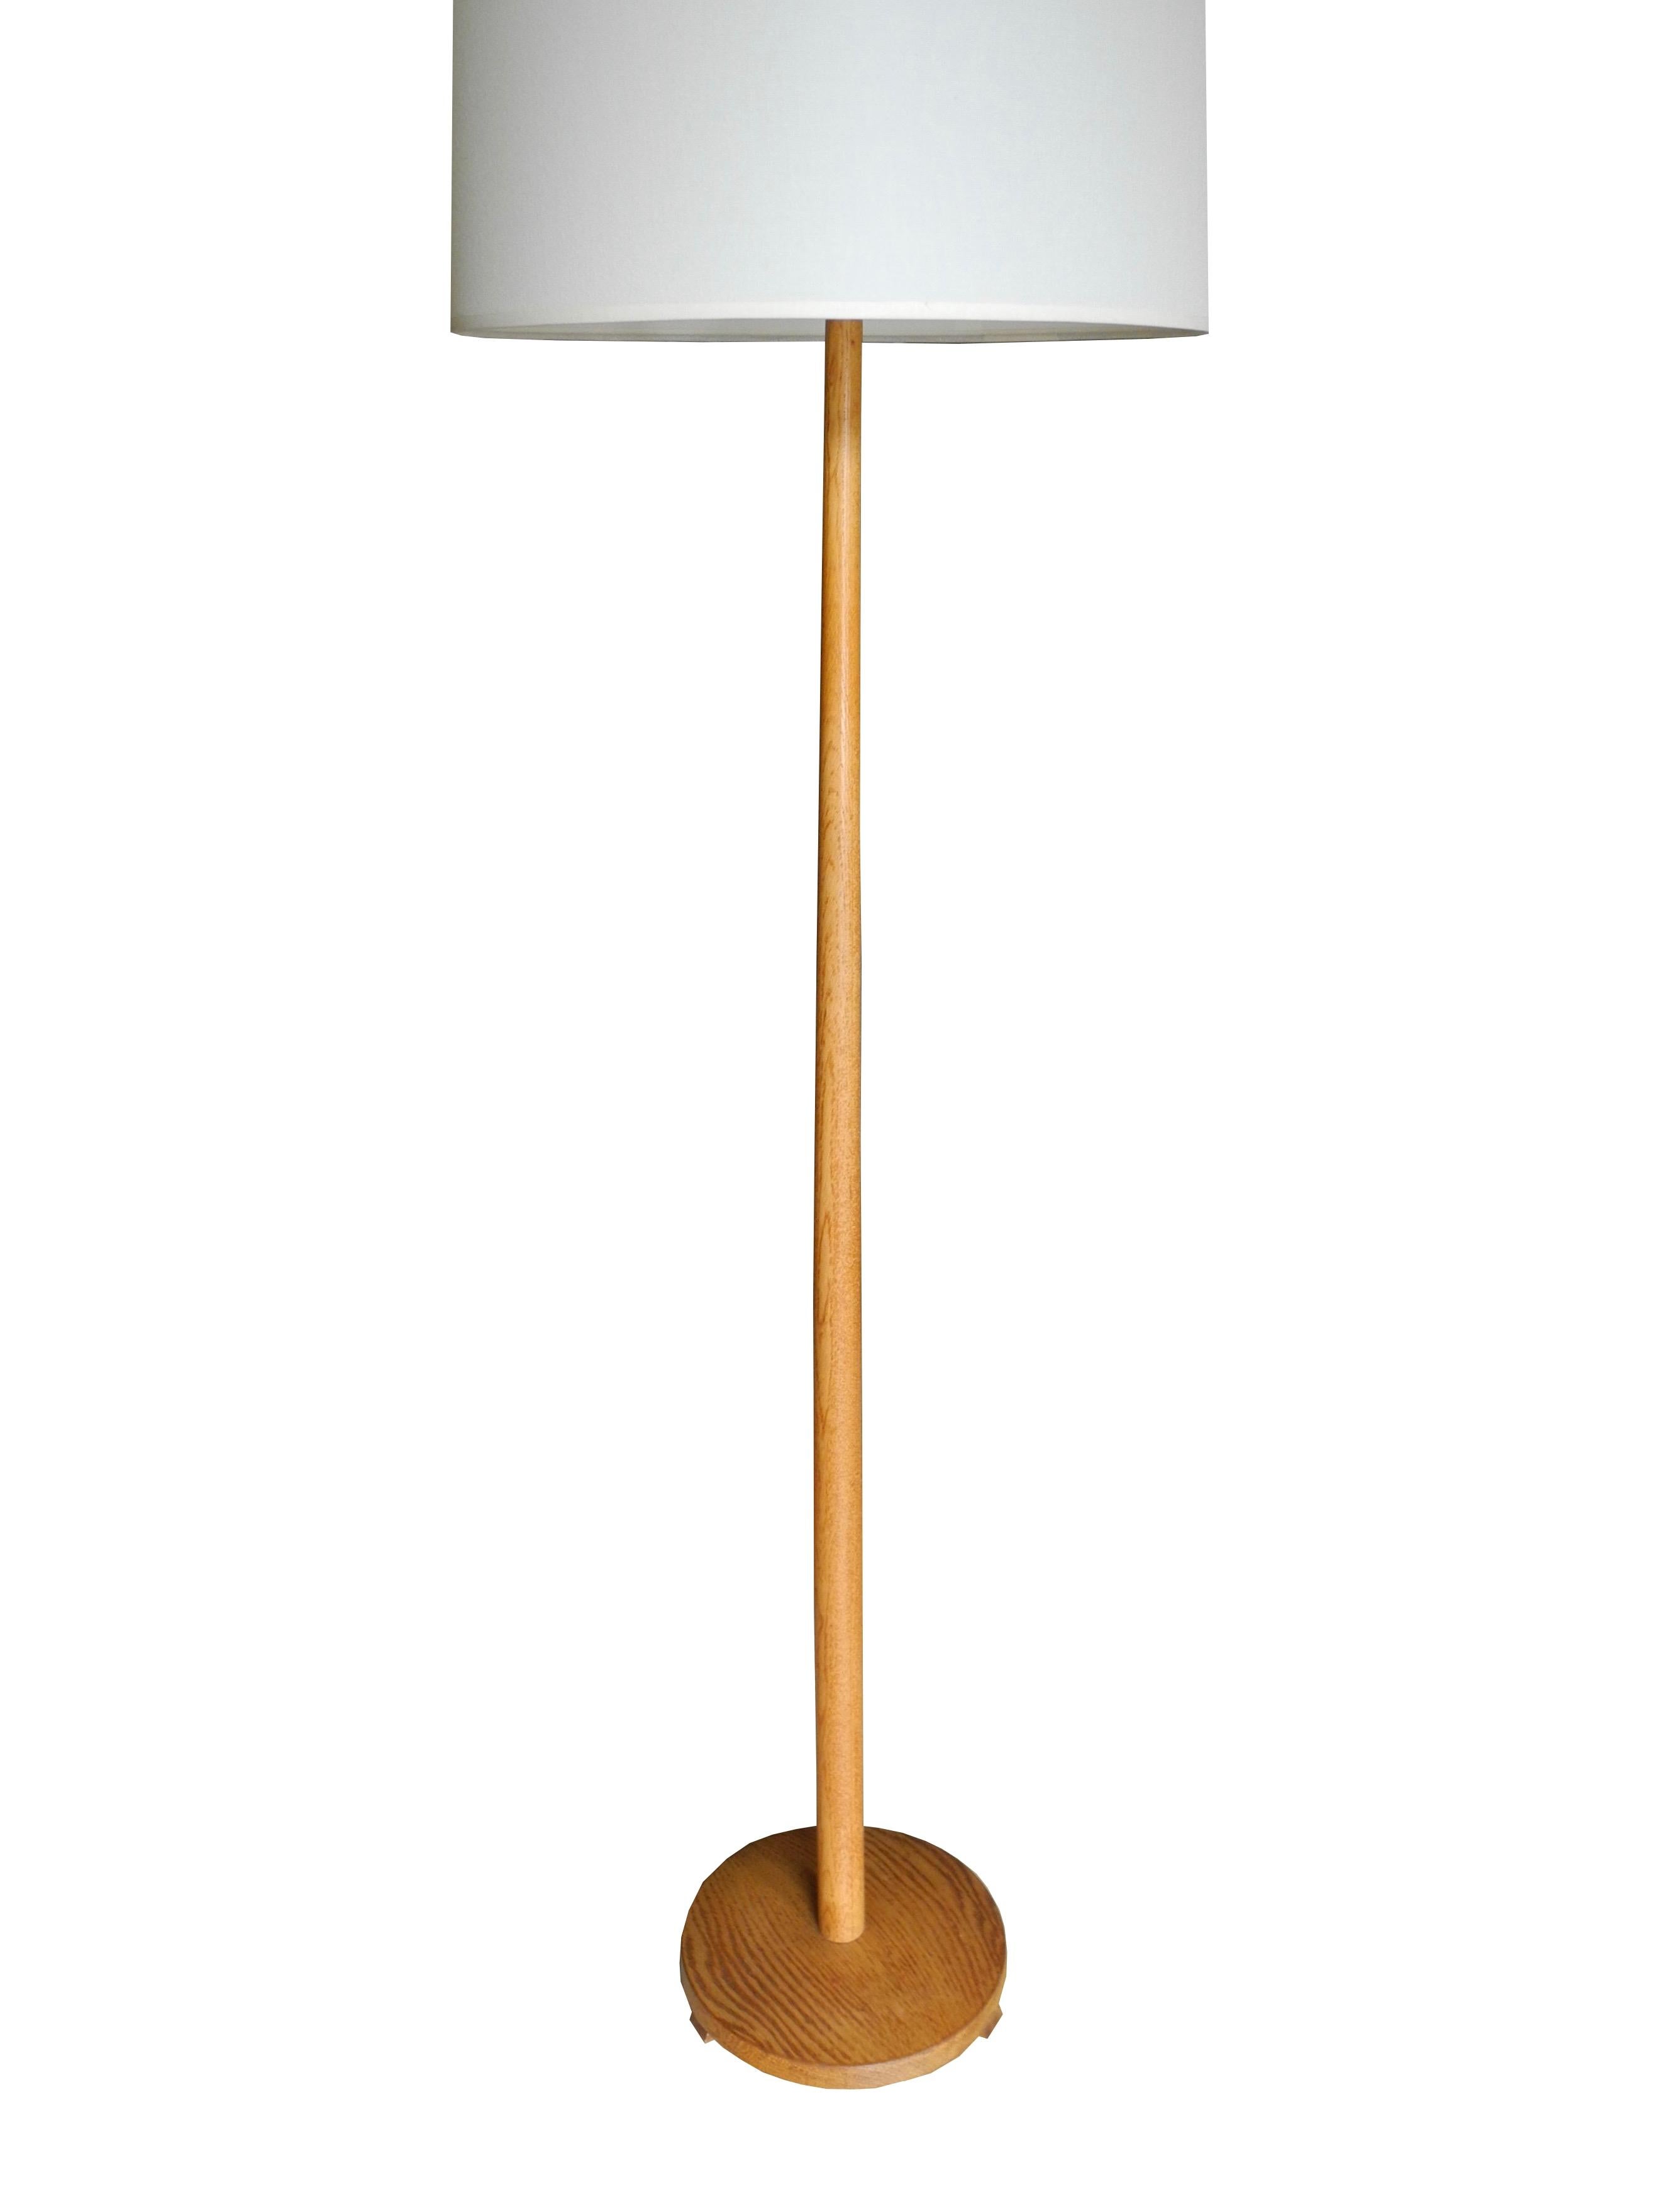 Made of solid oak this Danish Modern floor lamp is has a lot of style yet simple in design.